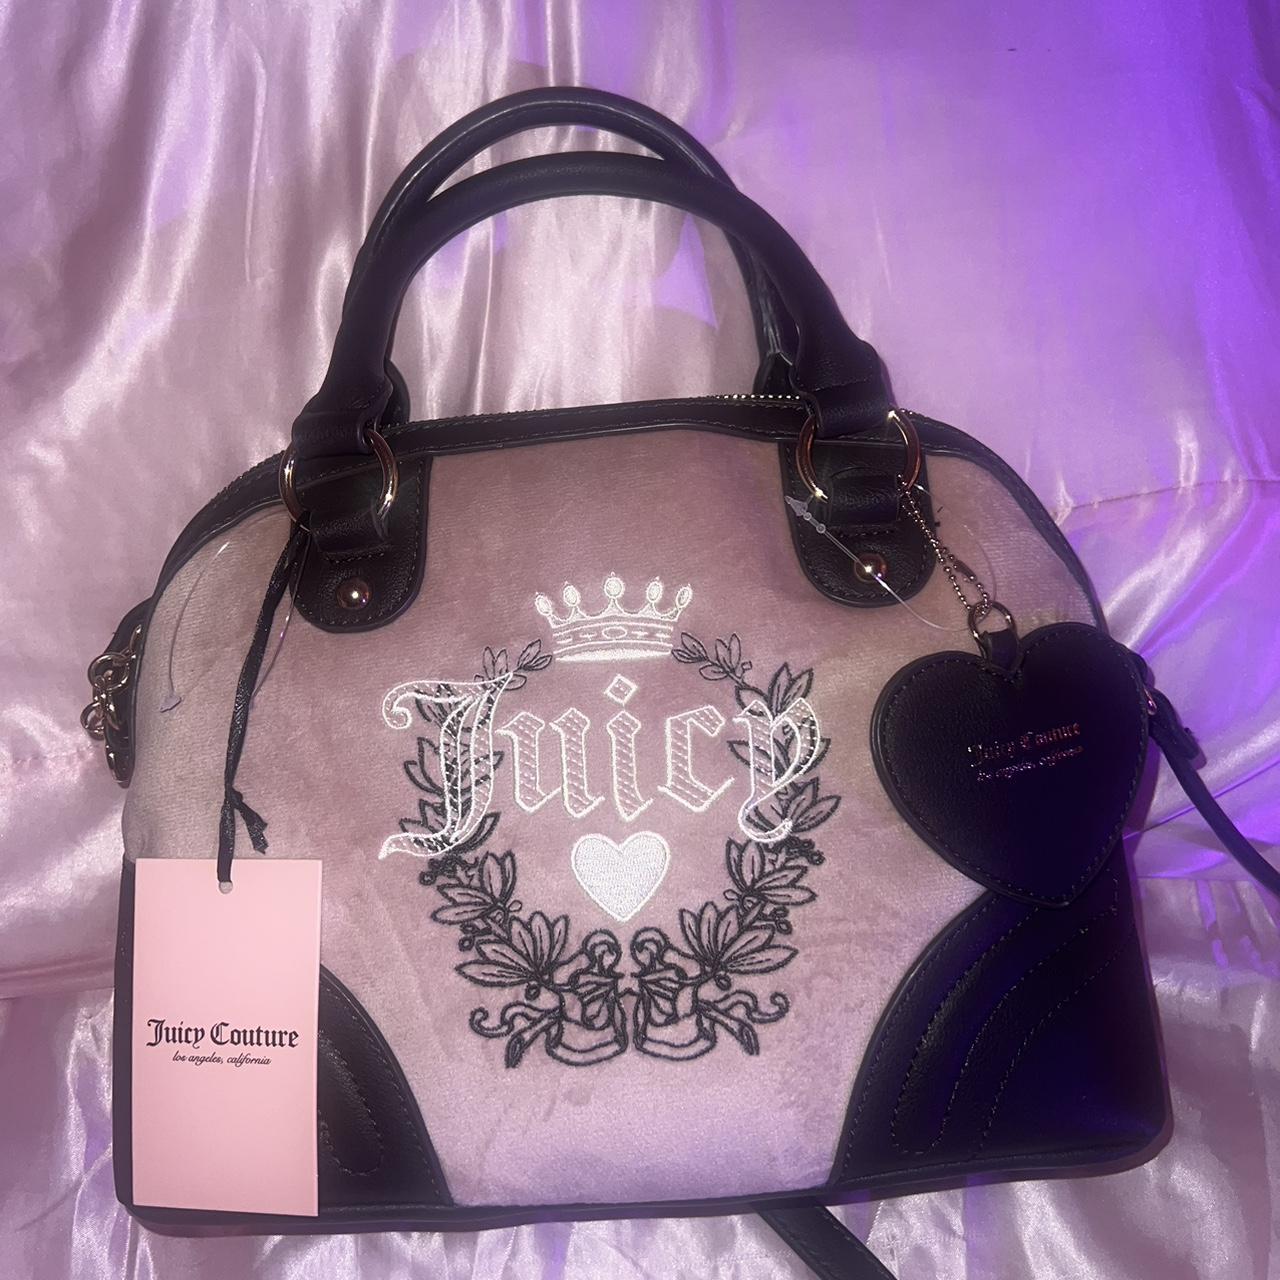 Juicy Couture Purse and Wallet | Juicy couture pink bag, Juicy couture  wallets, Juicy couture